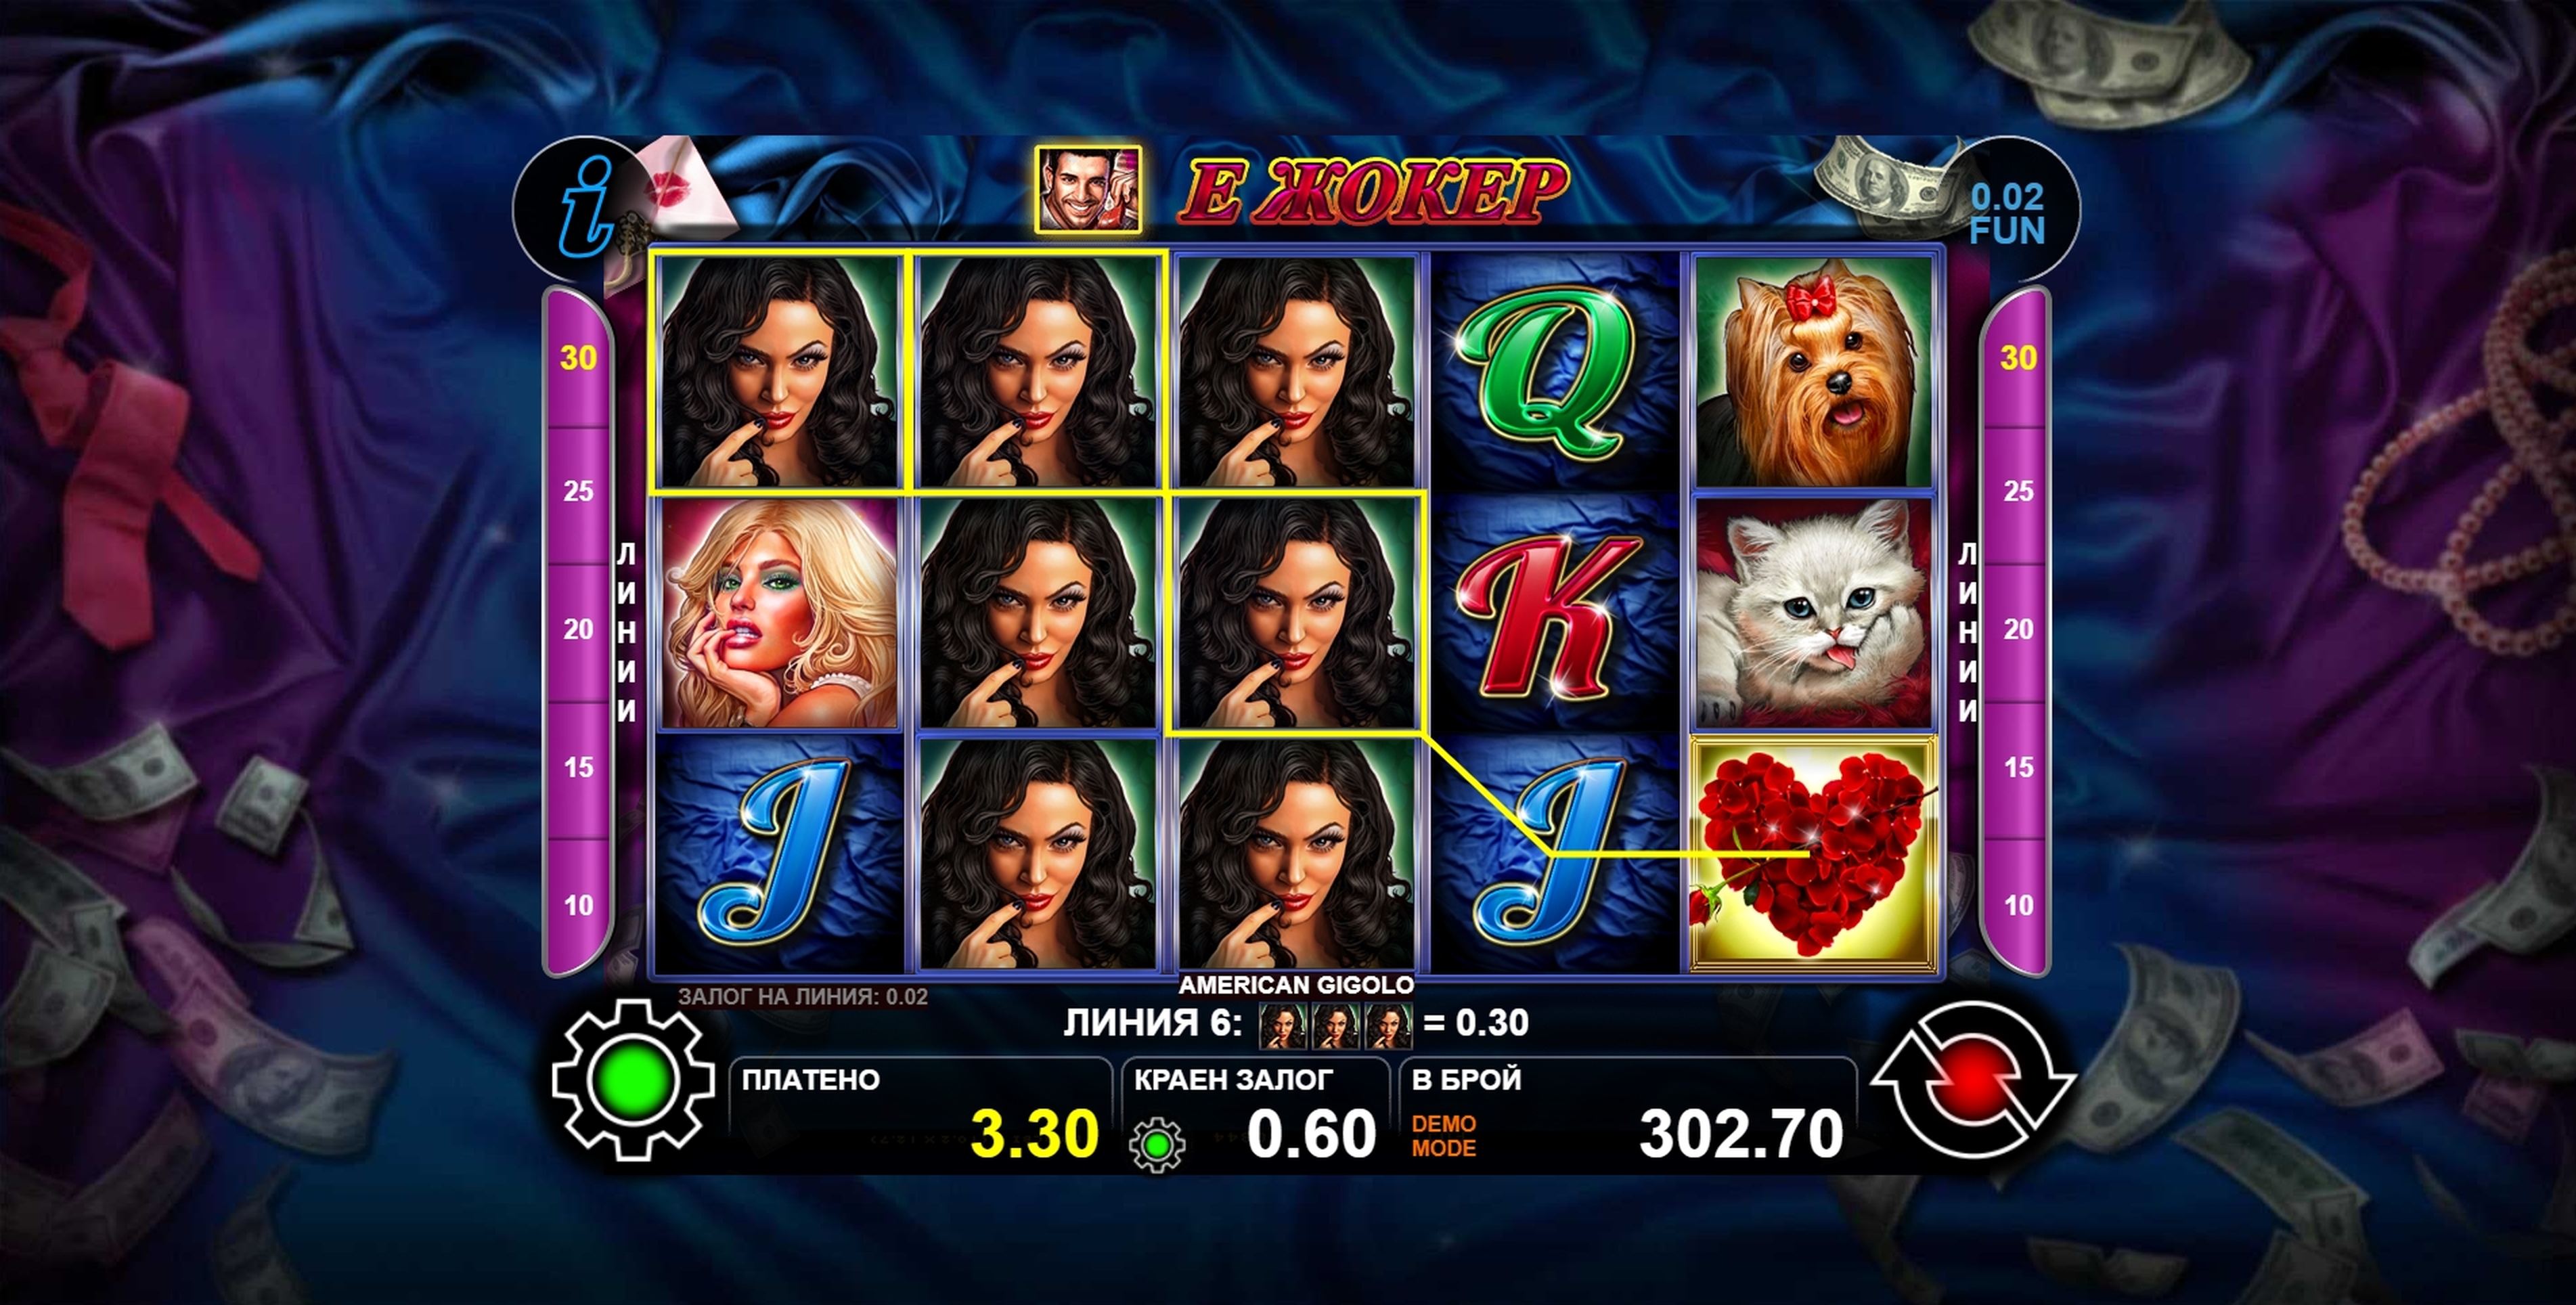 Win Money in American Gigolo Free Slot Game by casino technology